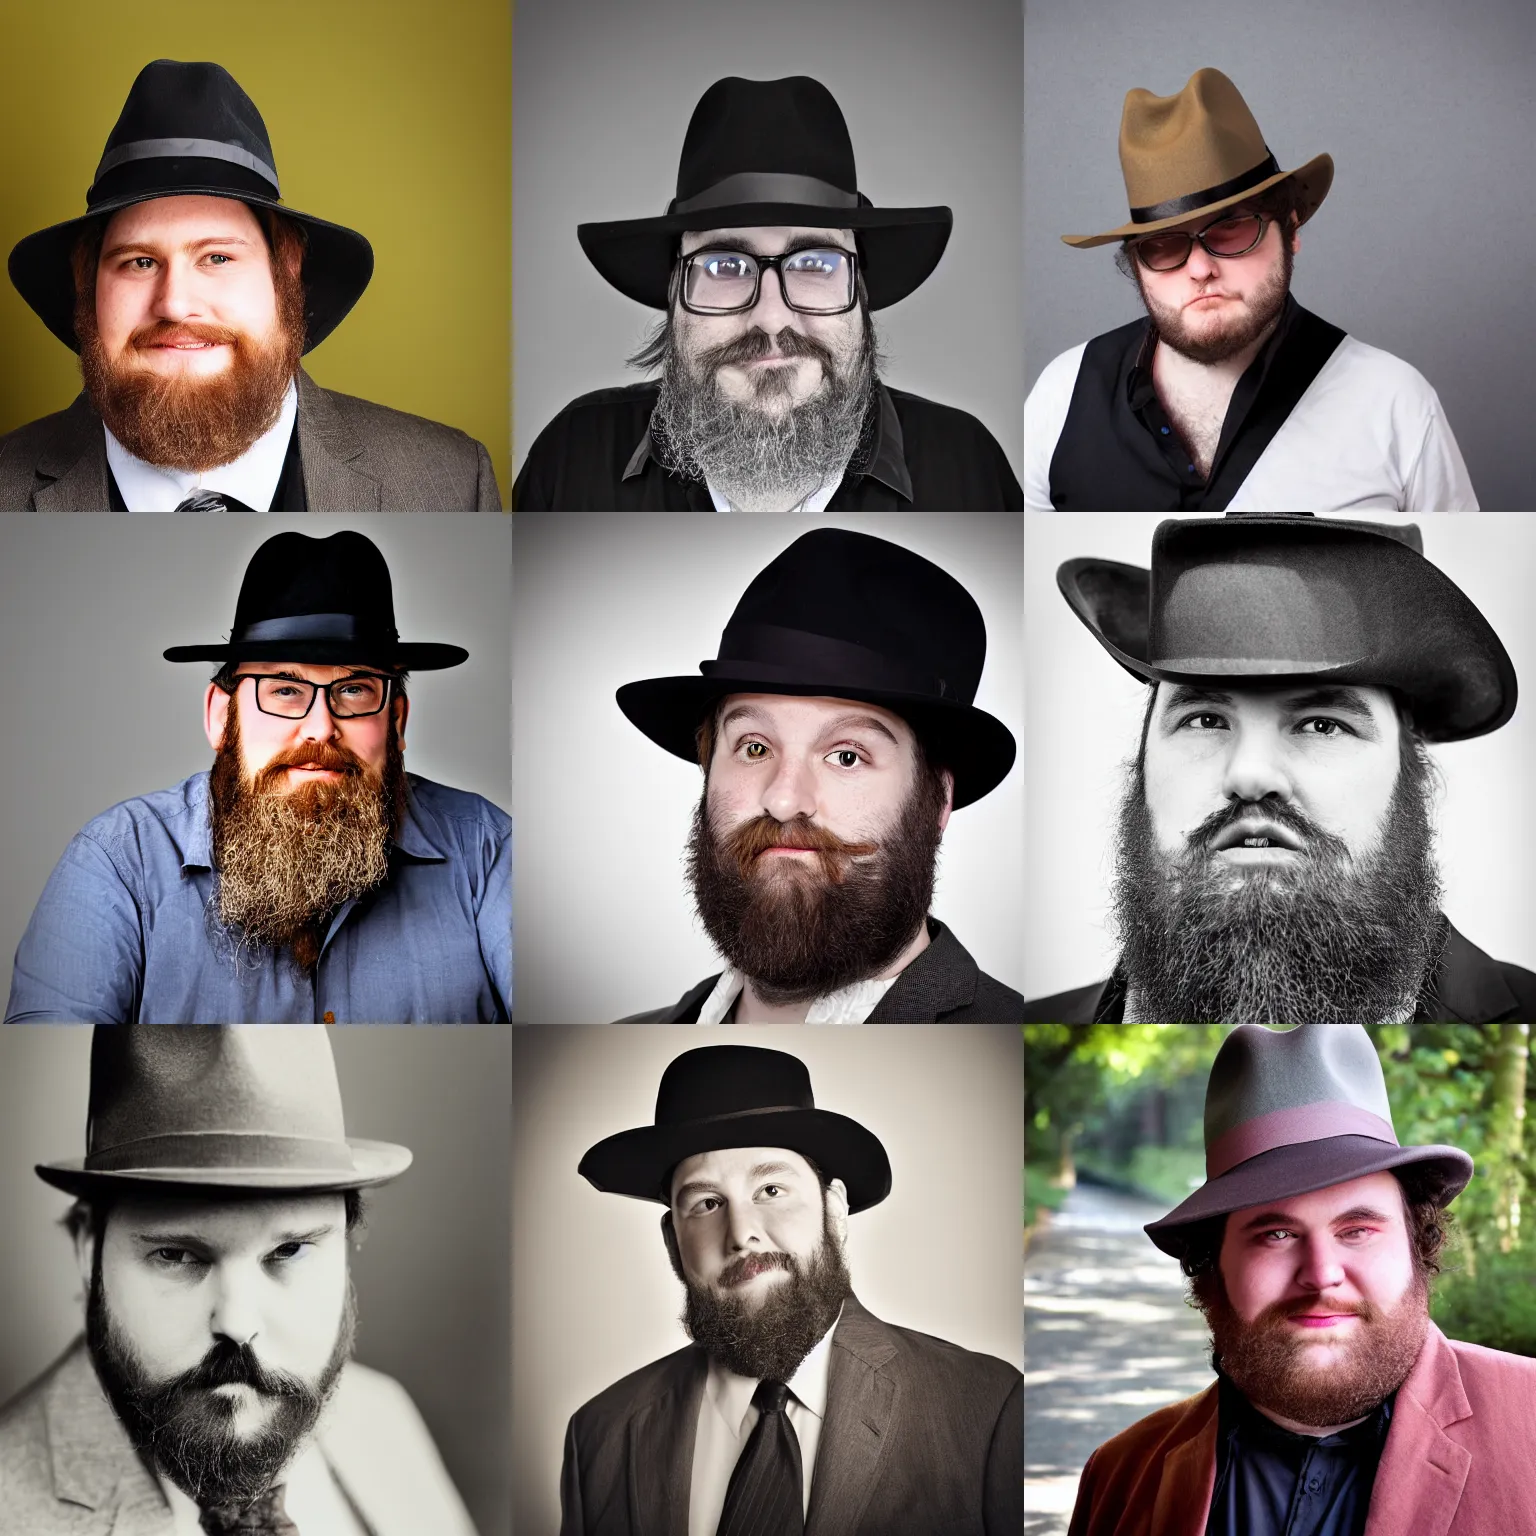 Prompt: Photograph portrait of the person with the biggest neckbeard ever, tipping his fedora